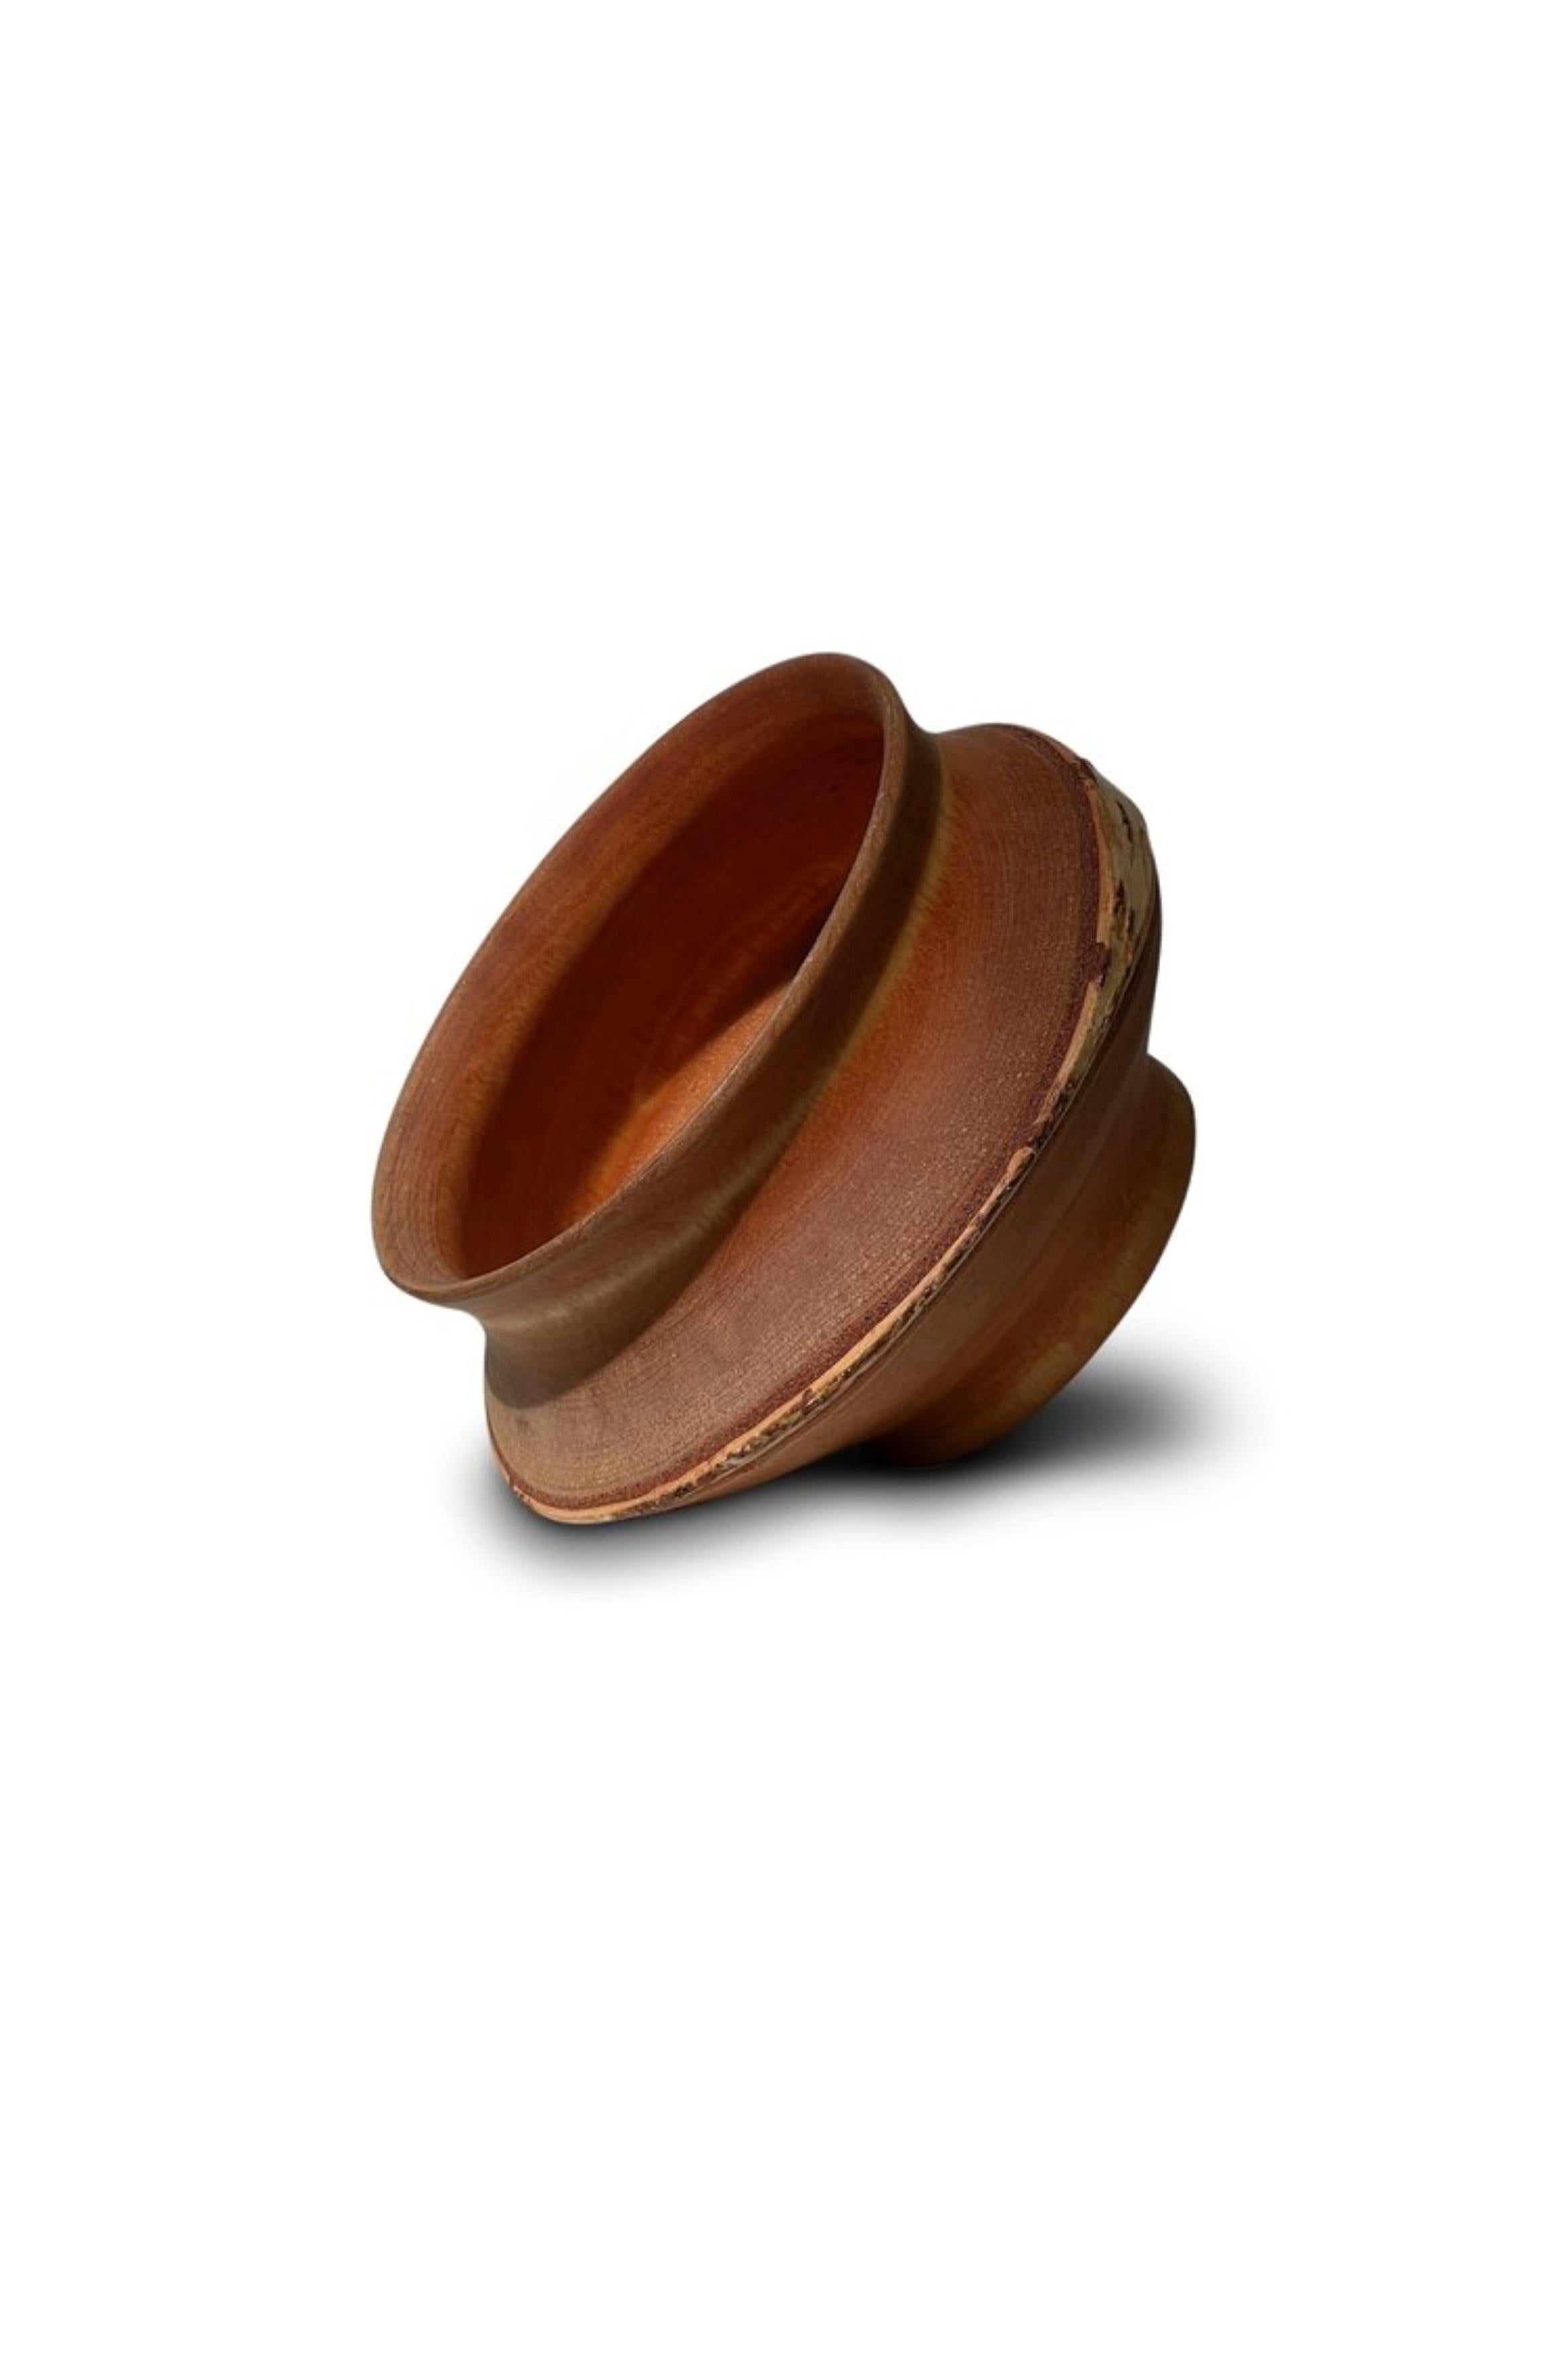 Crafted from solid wood, this vintage bowl boasts a unique lighter wood ring around its center, creating a striking visual contrast. Its spacious design lends itself perfectly to serving salads, fruits, or acting as a decorative centerpiece. With